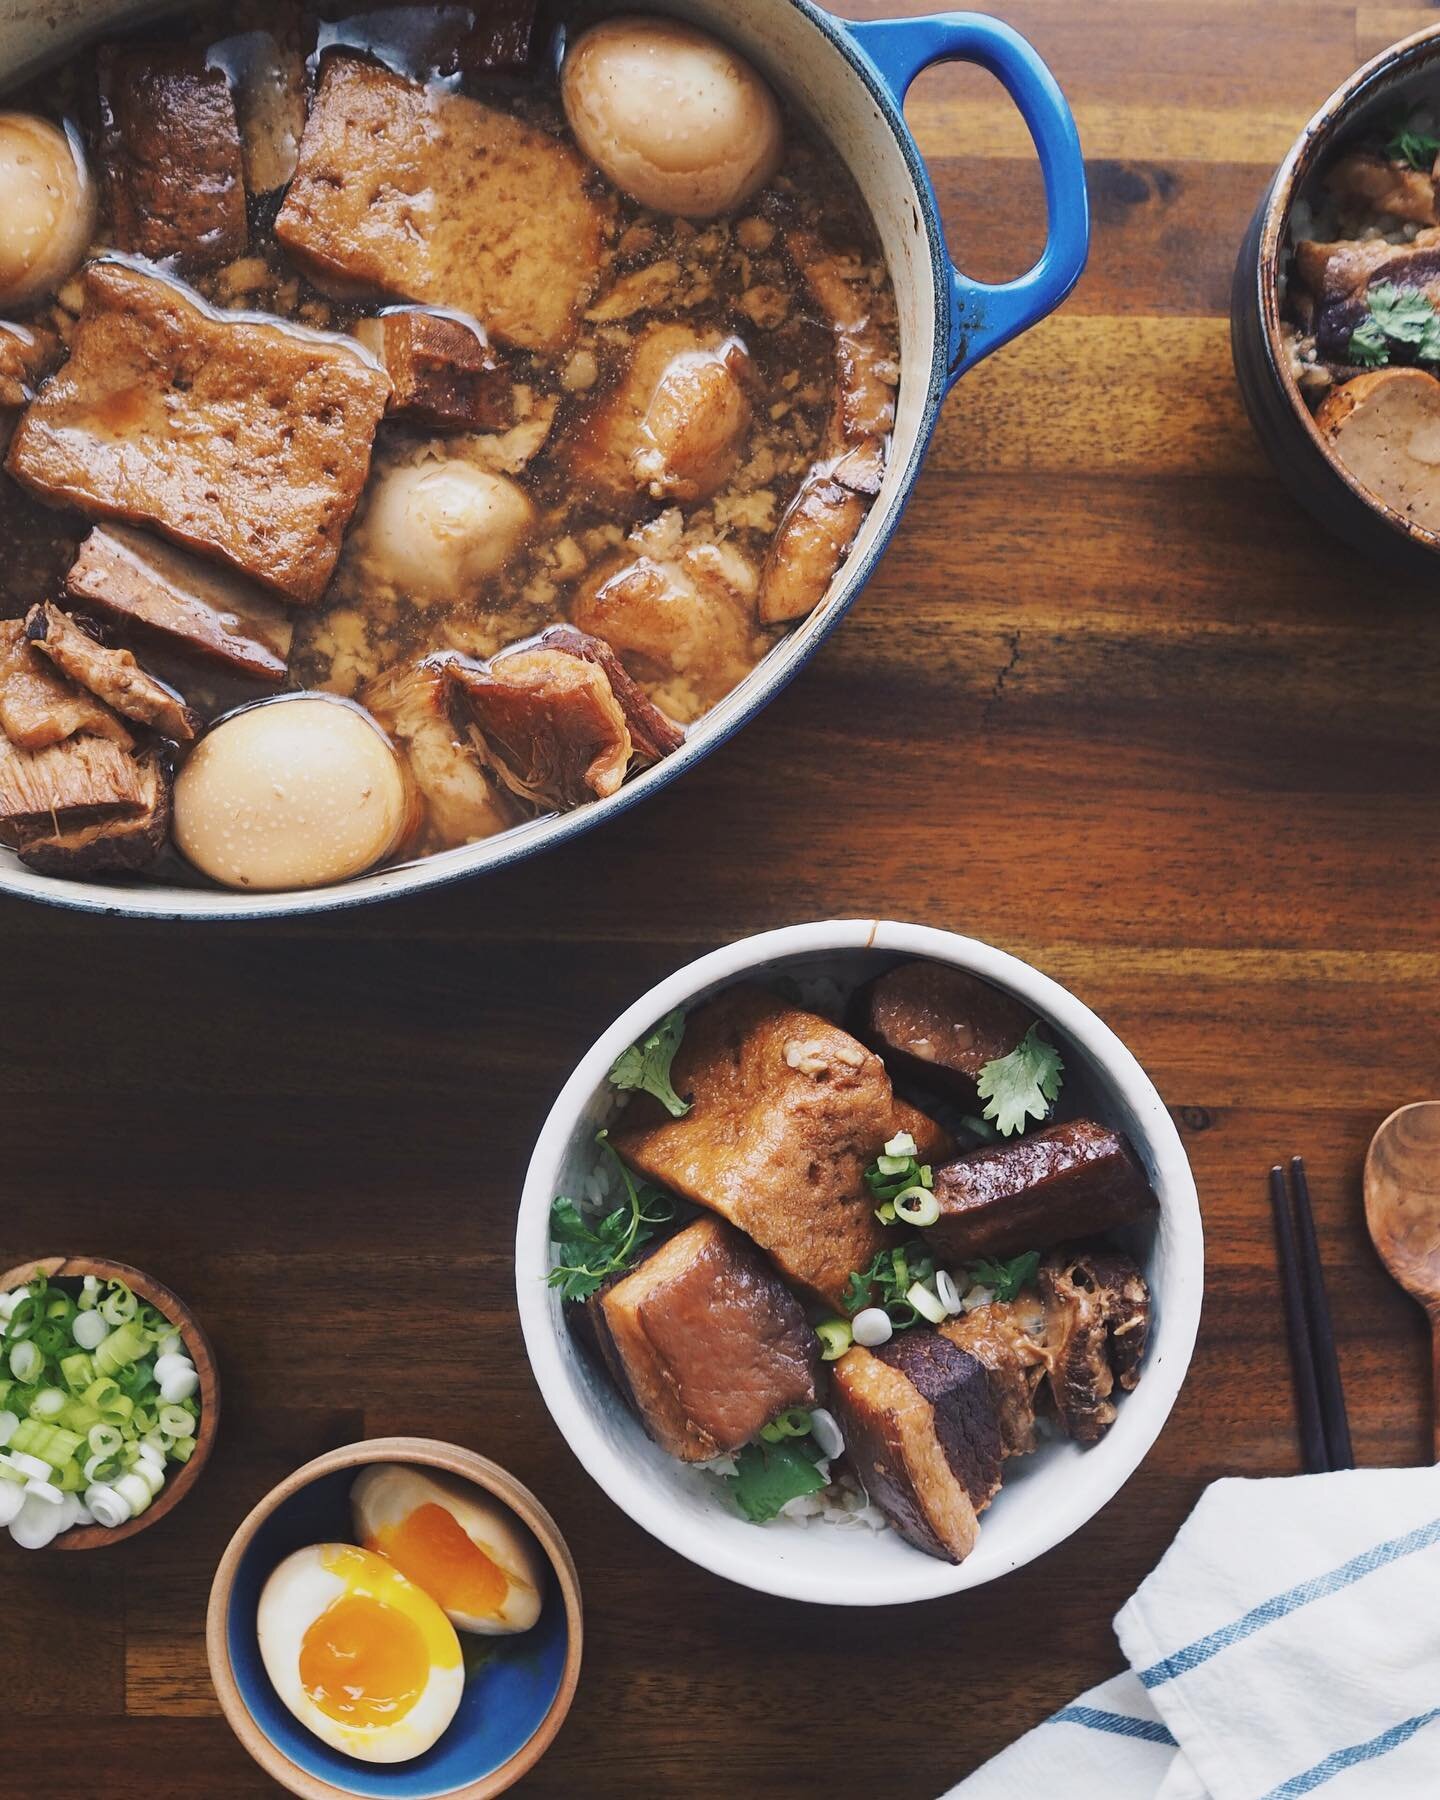 taiwanese braised pork with fried tofu, bean curd, and egg